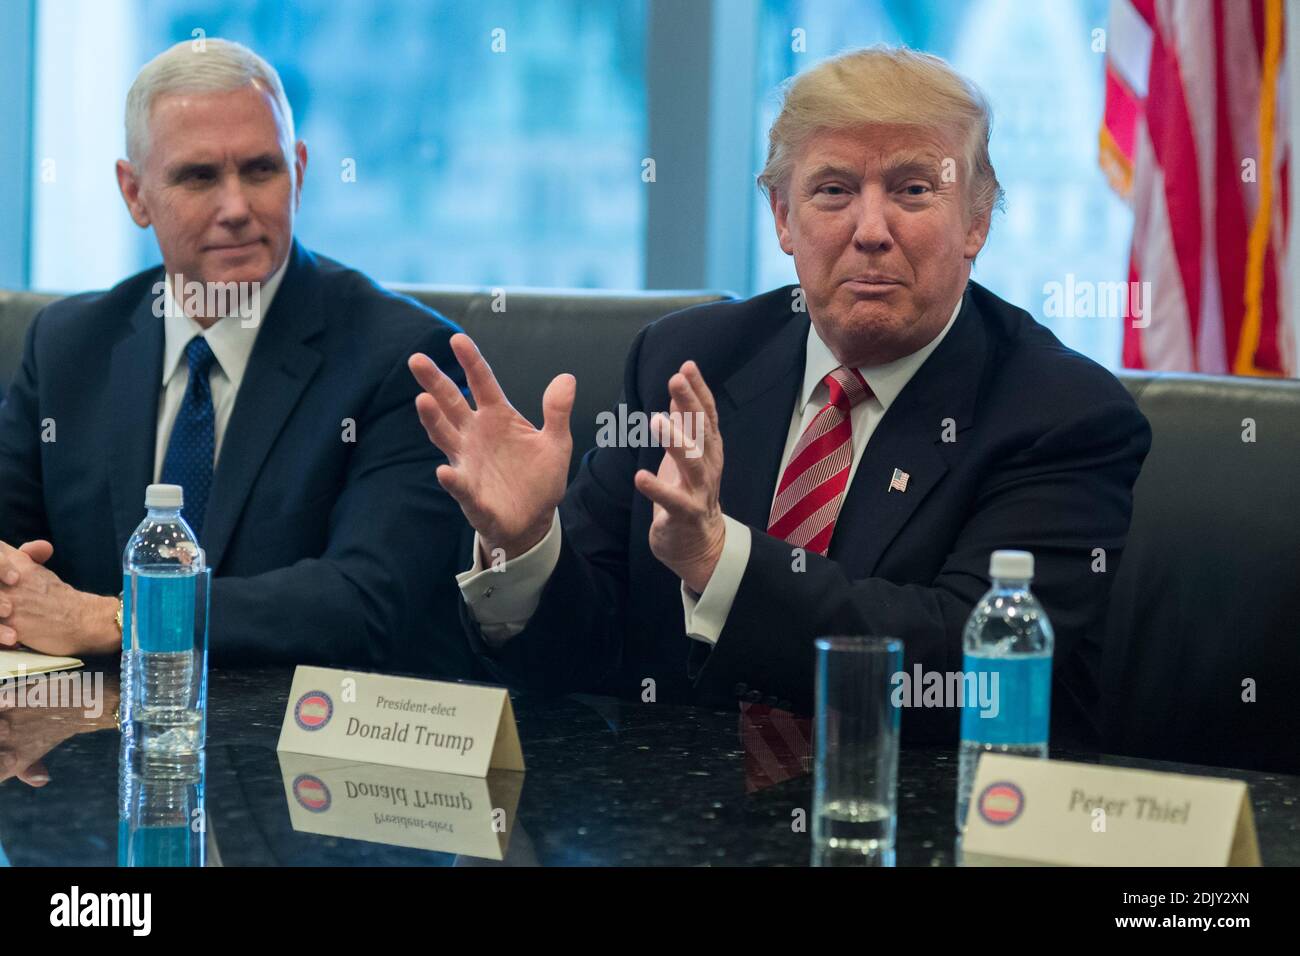 President-elect Donald Trump is seen at a meeting of technology leaders in the Trump Organization conference room at Trump Tower in New York, NY, USA on December 14, 2016. Credit: Albin Lohr-Jones / Pool via CNP Stock Photo